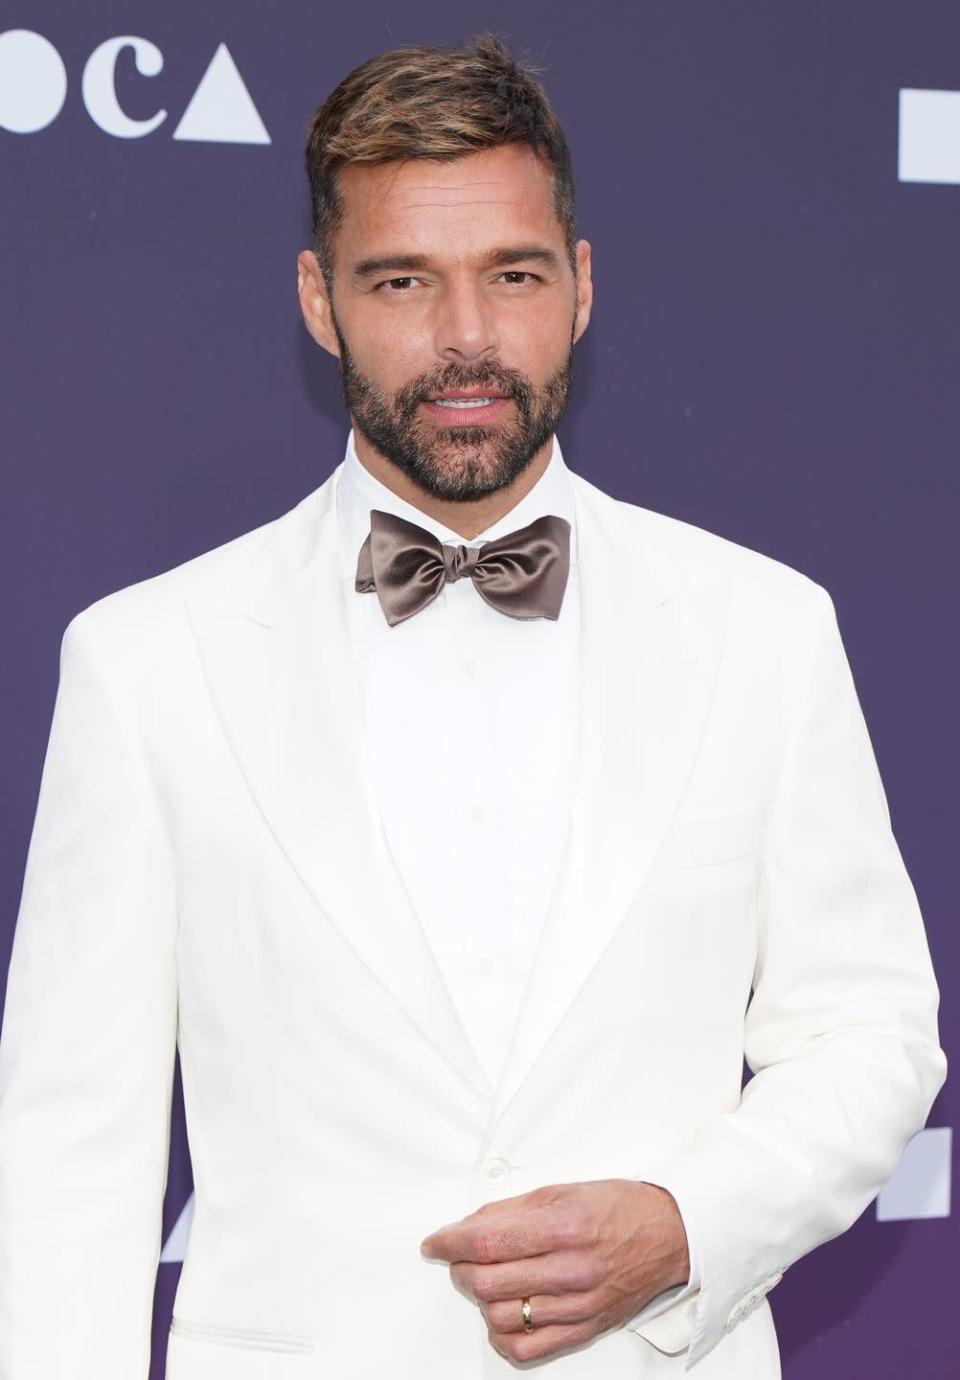 <p>As you can see, Ricky has kept it TIGHT. Besides remaining very good-looking (which, well done, mate), he’s still releasing new music. He’s dabbled in acting too, recently starring in the second season of <em>American Crime Story.</em><br></p>